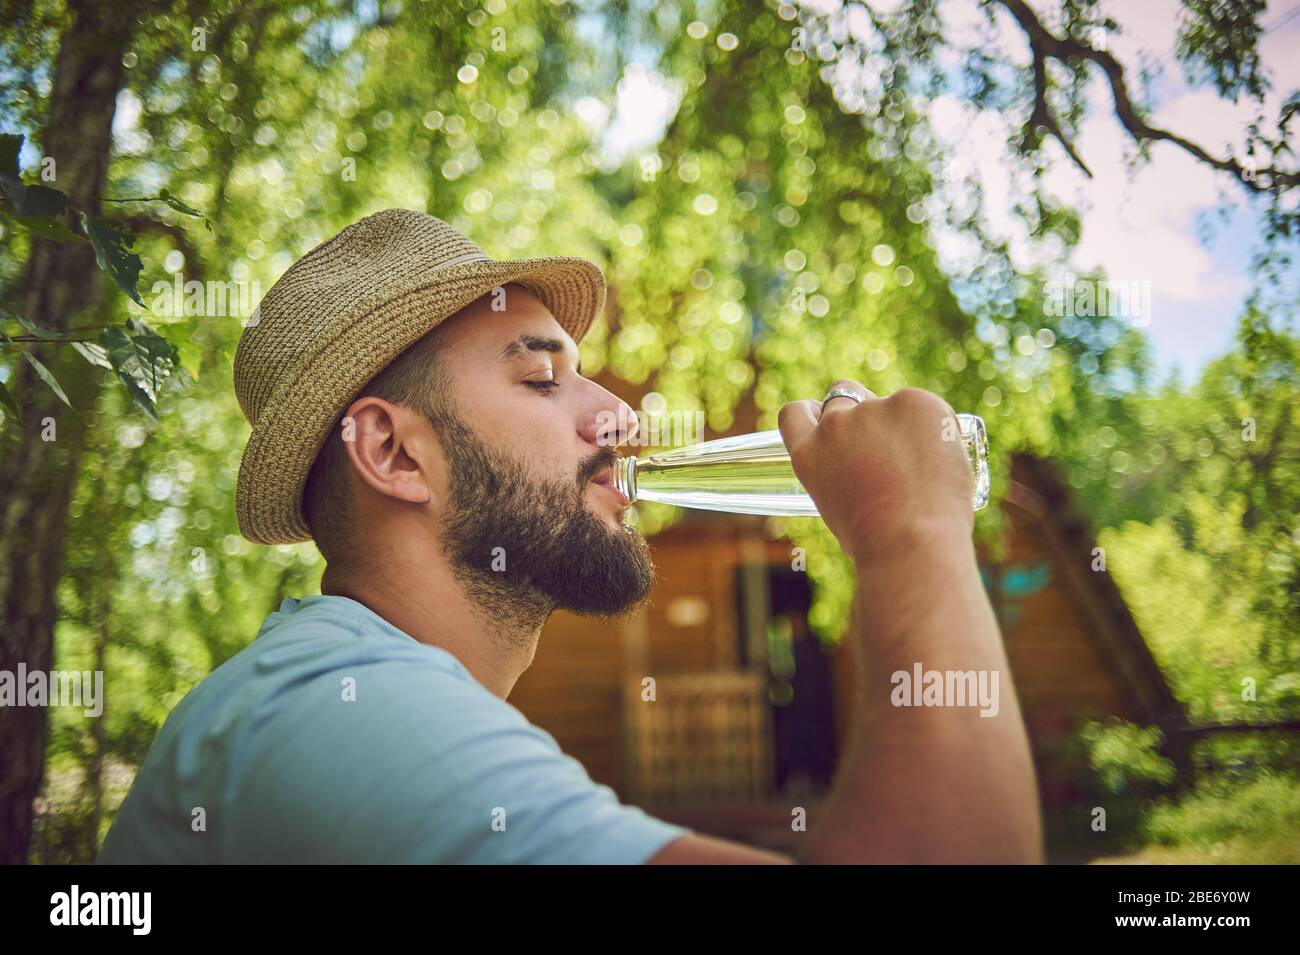 Portrait of a happy young man drinking some water from a bottle while sitting and resting in a park Stock Photo